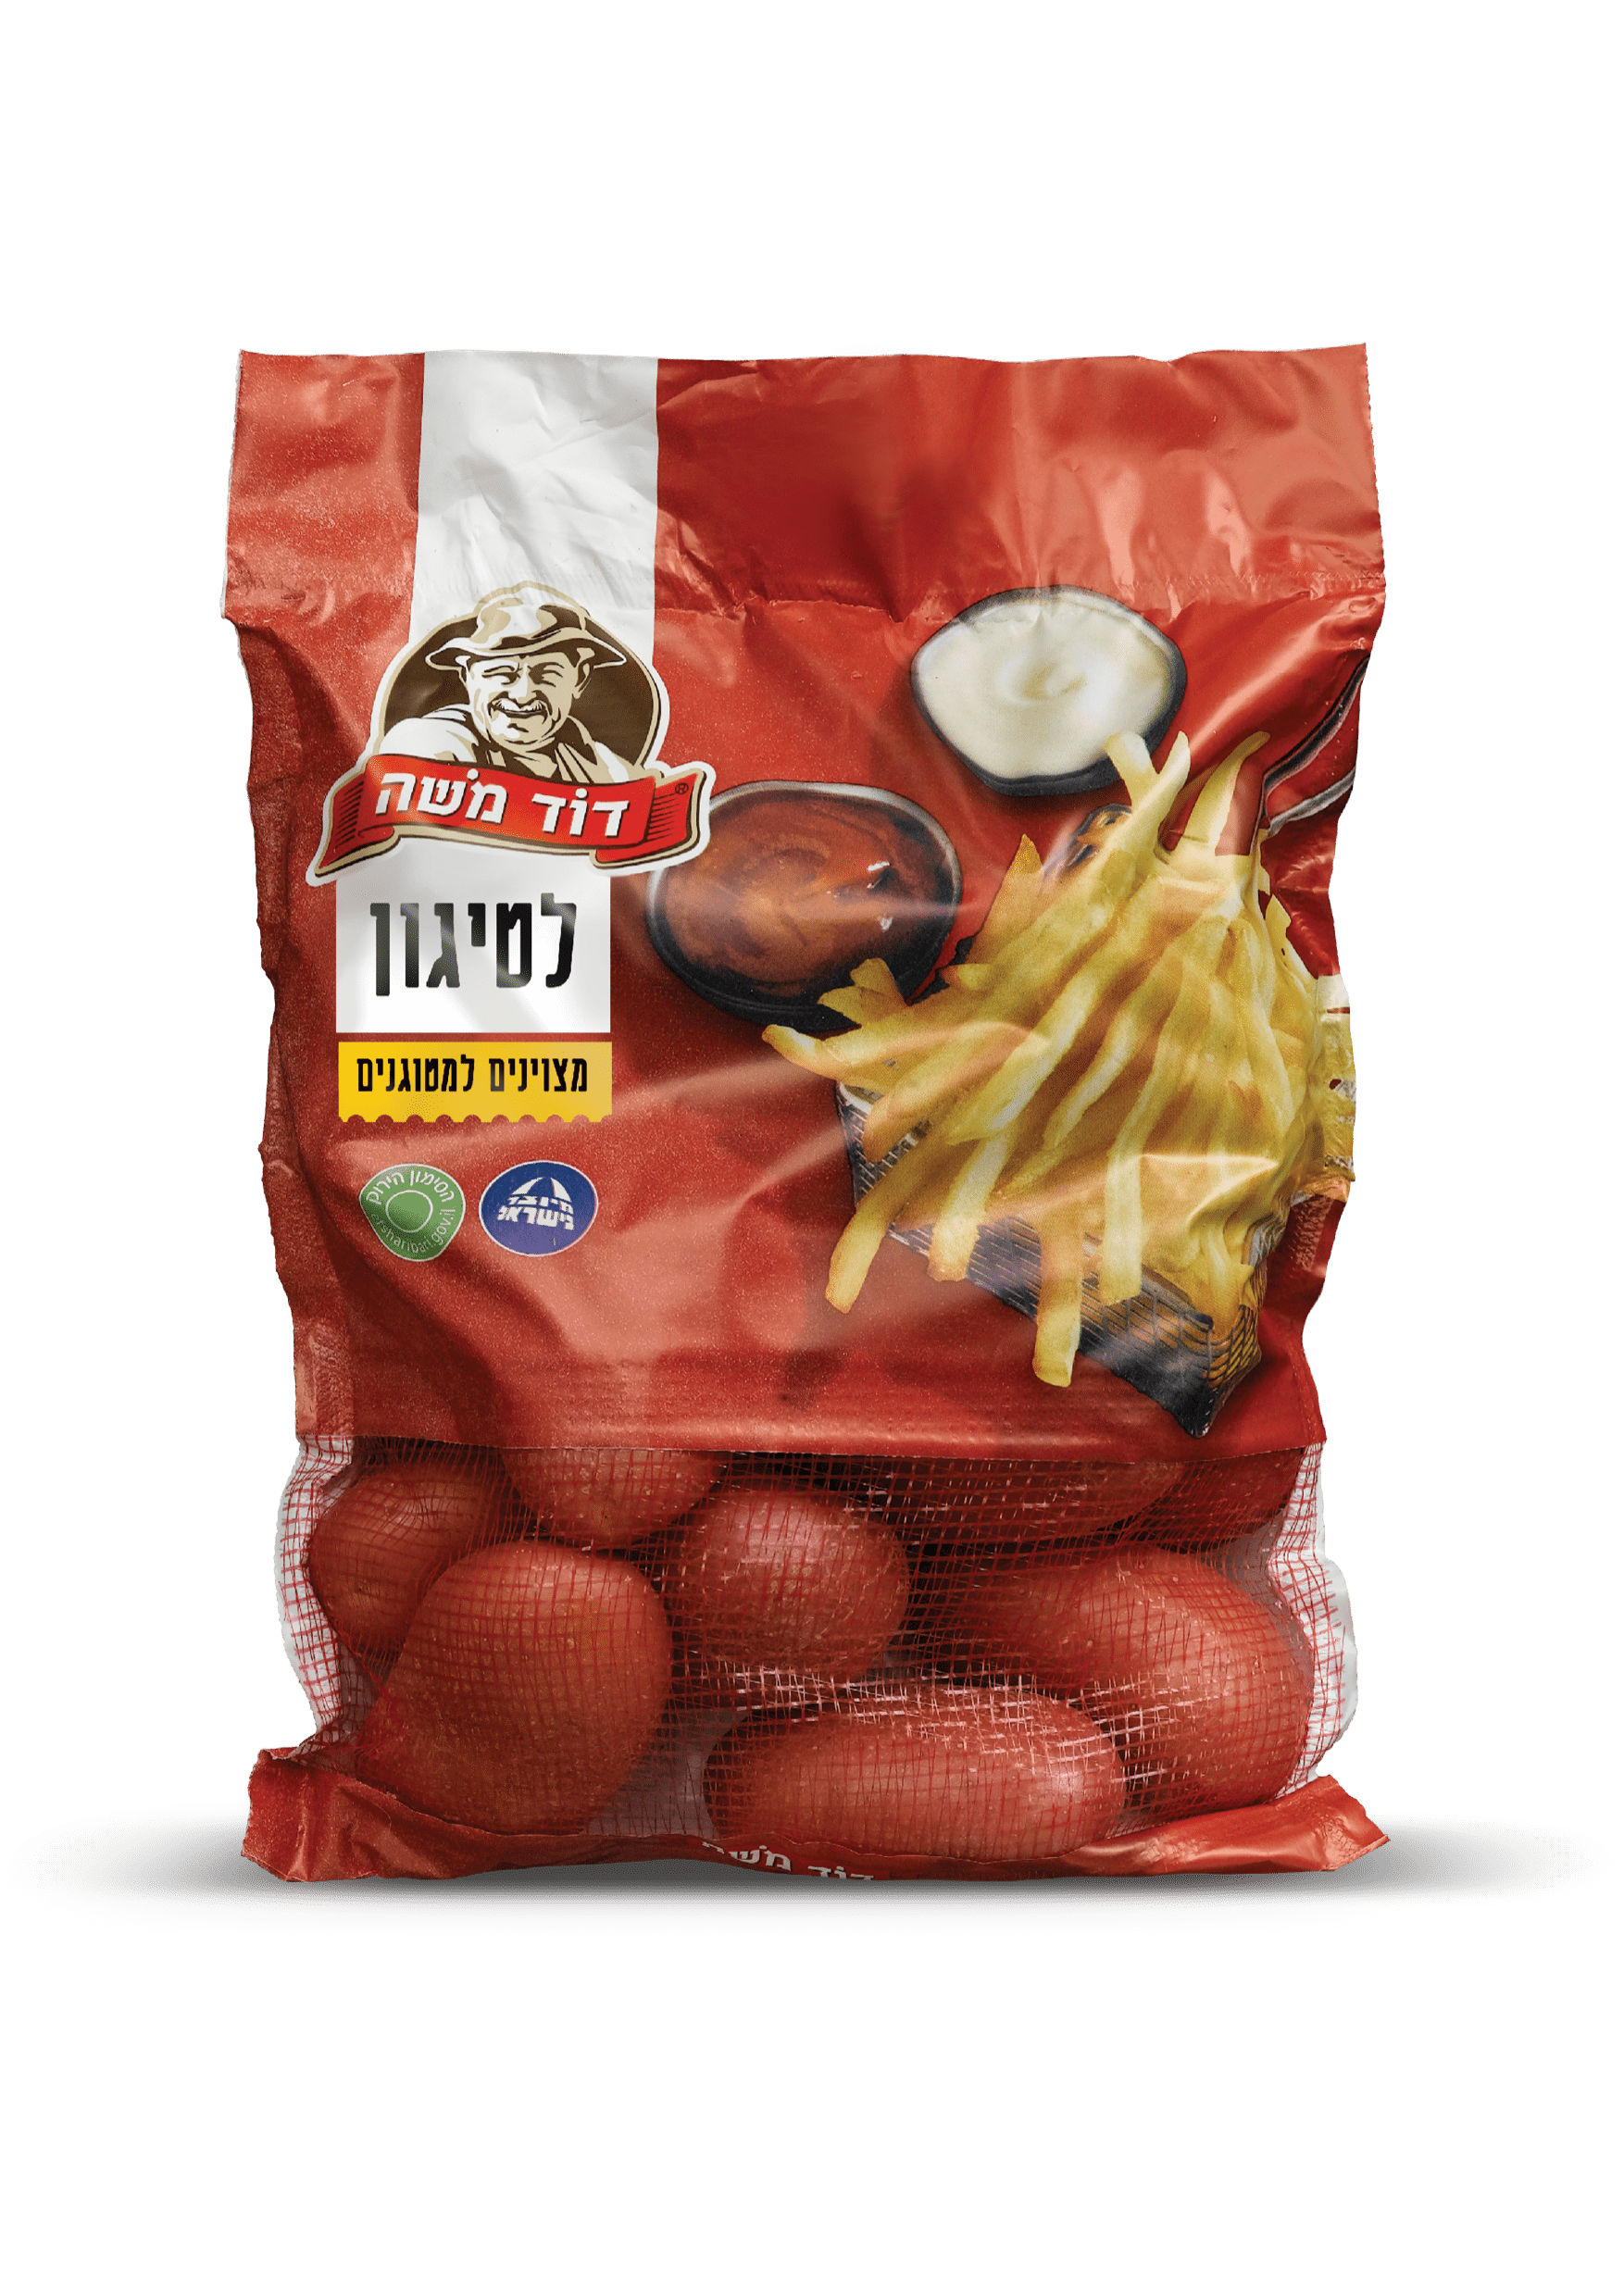 A net bag of potatoes made especially for frying